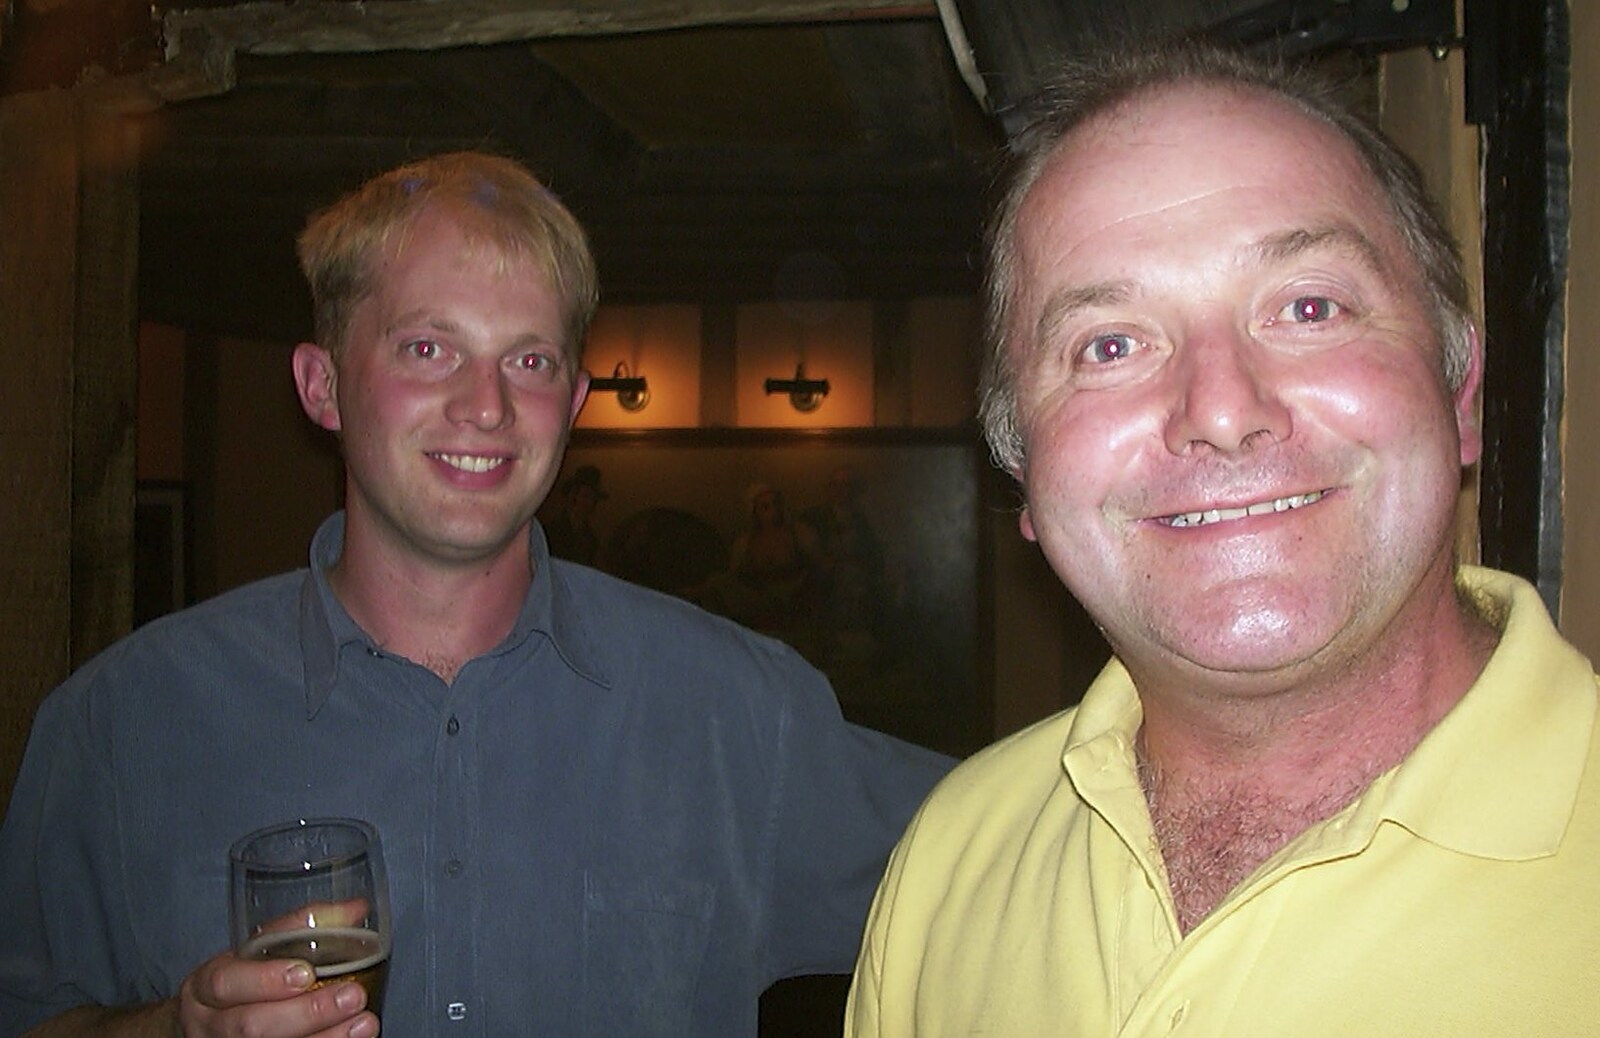 Paul and Ian Colchester from Paul's Stag Night, Brome, Scole and Bressingham - Friday 20th August 2004